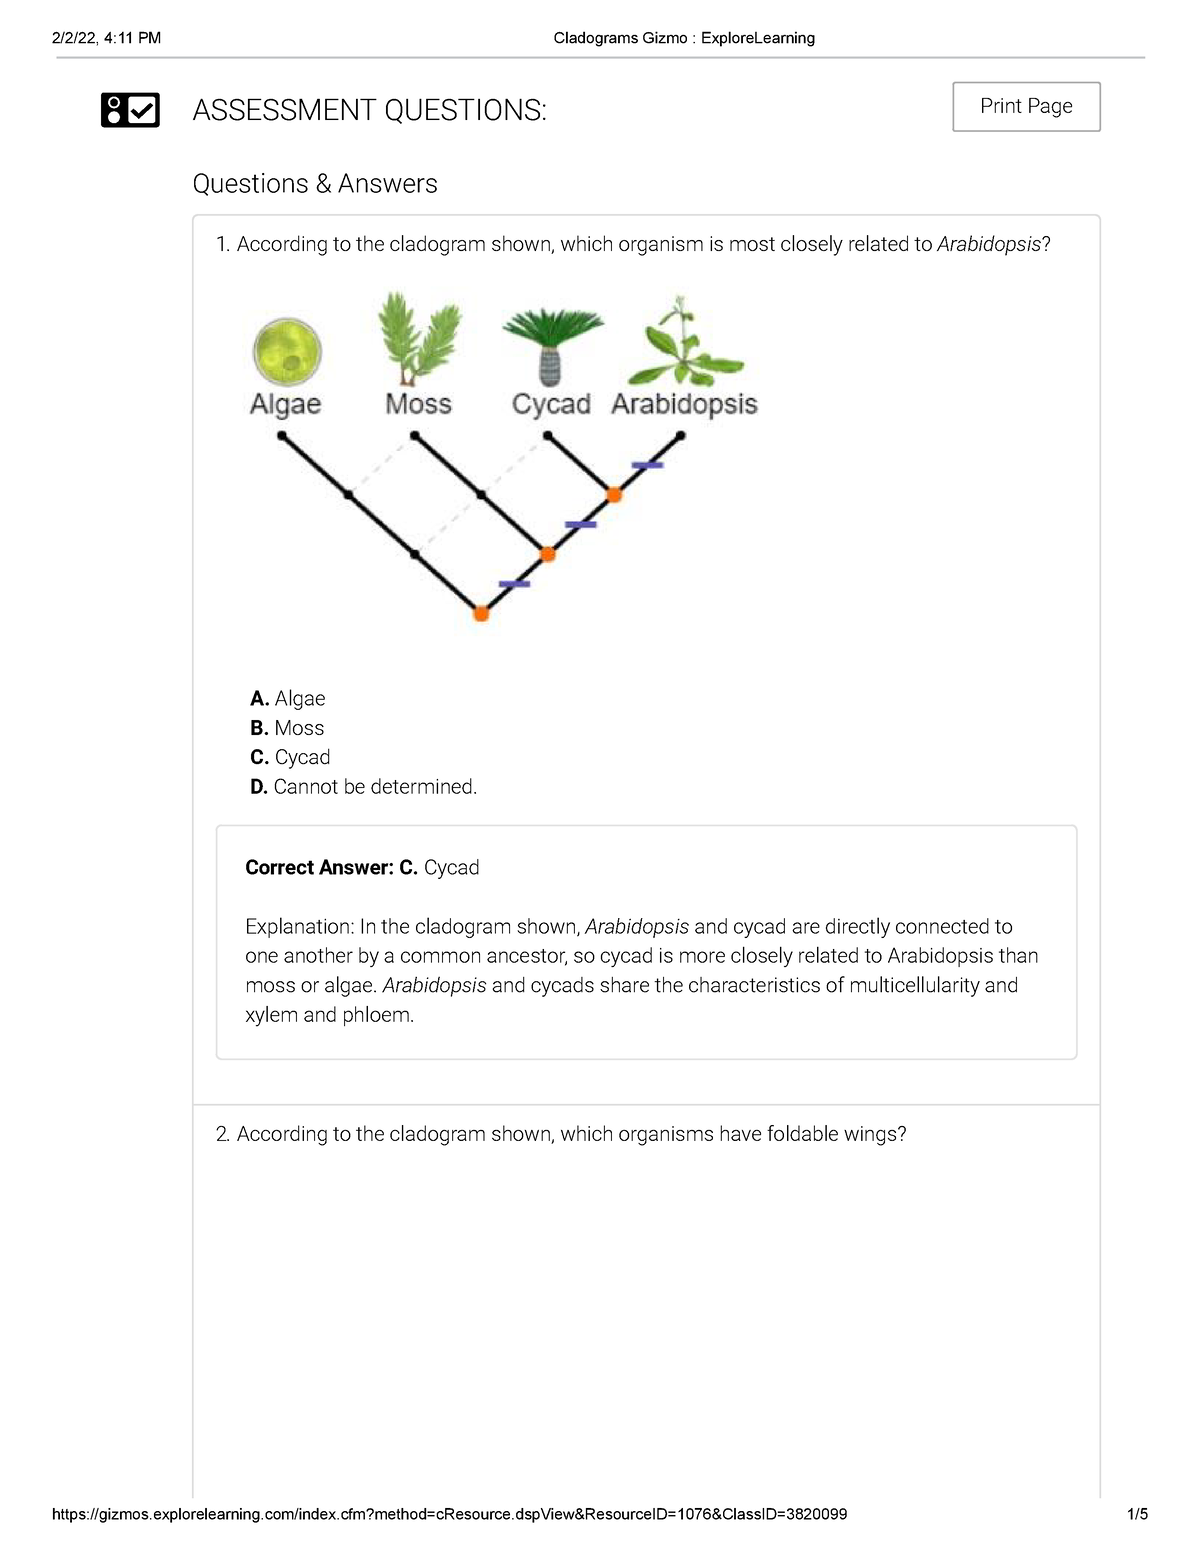 cladograms-gizmo-explore-learning-assessment-questions-print-page